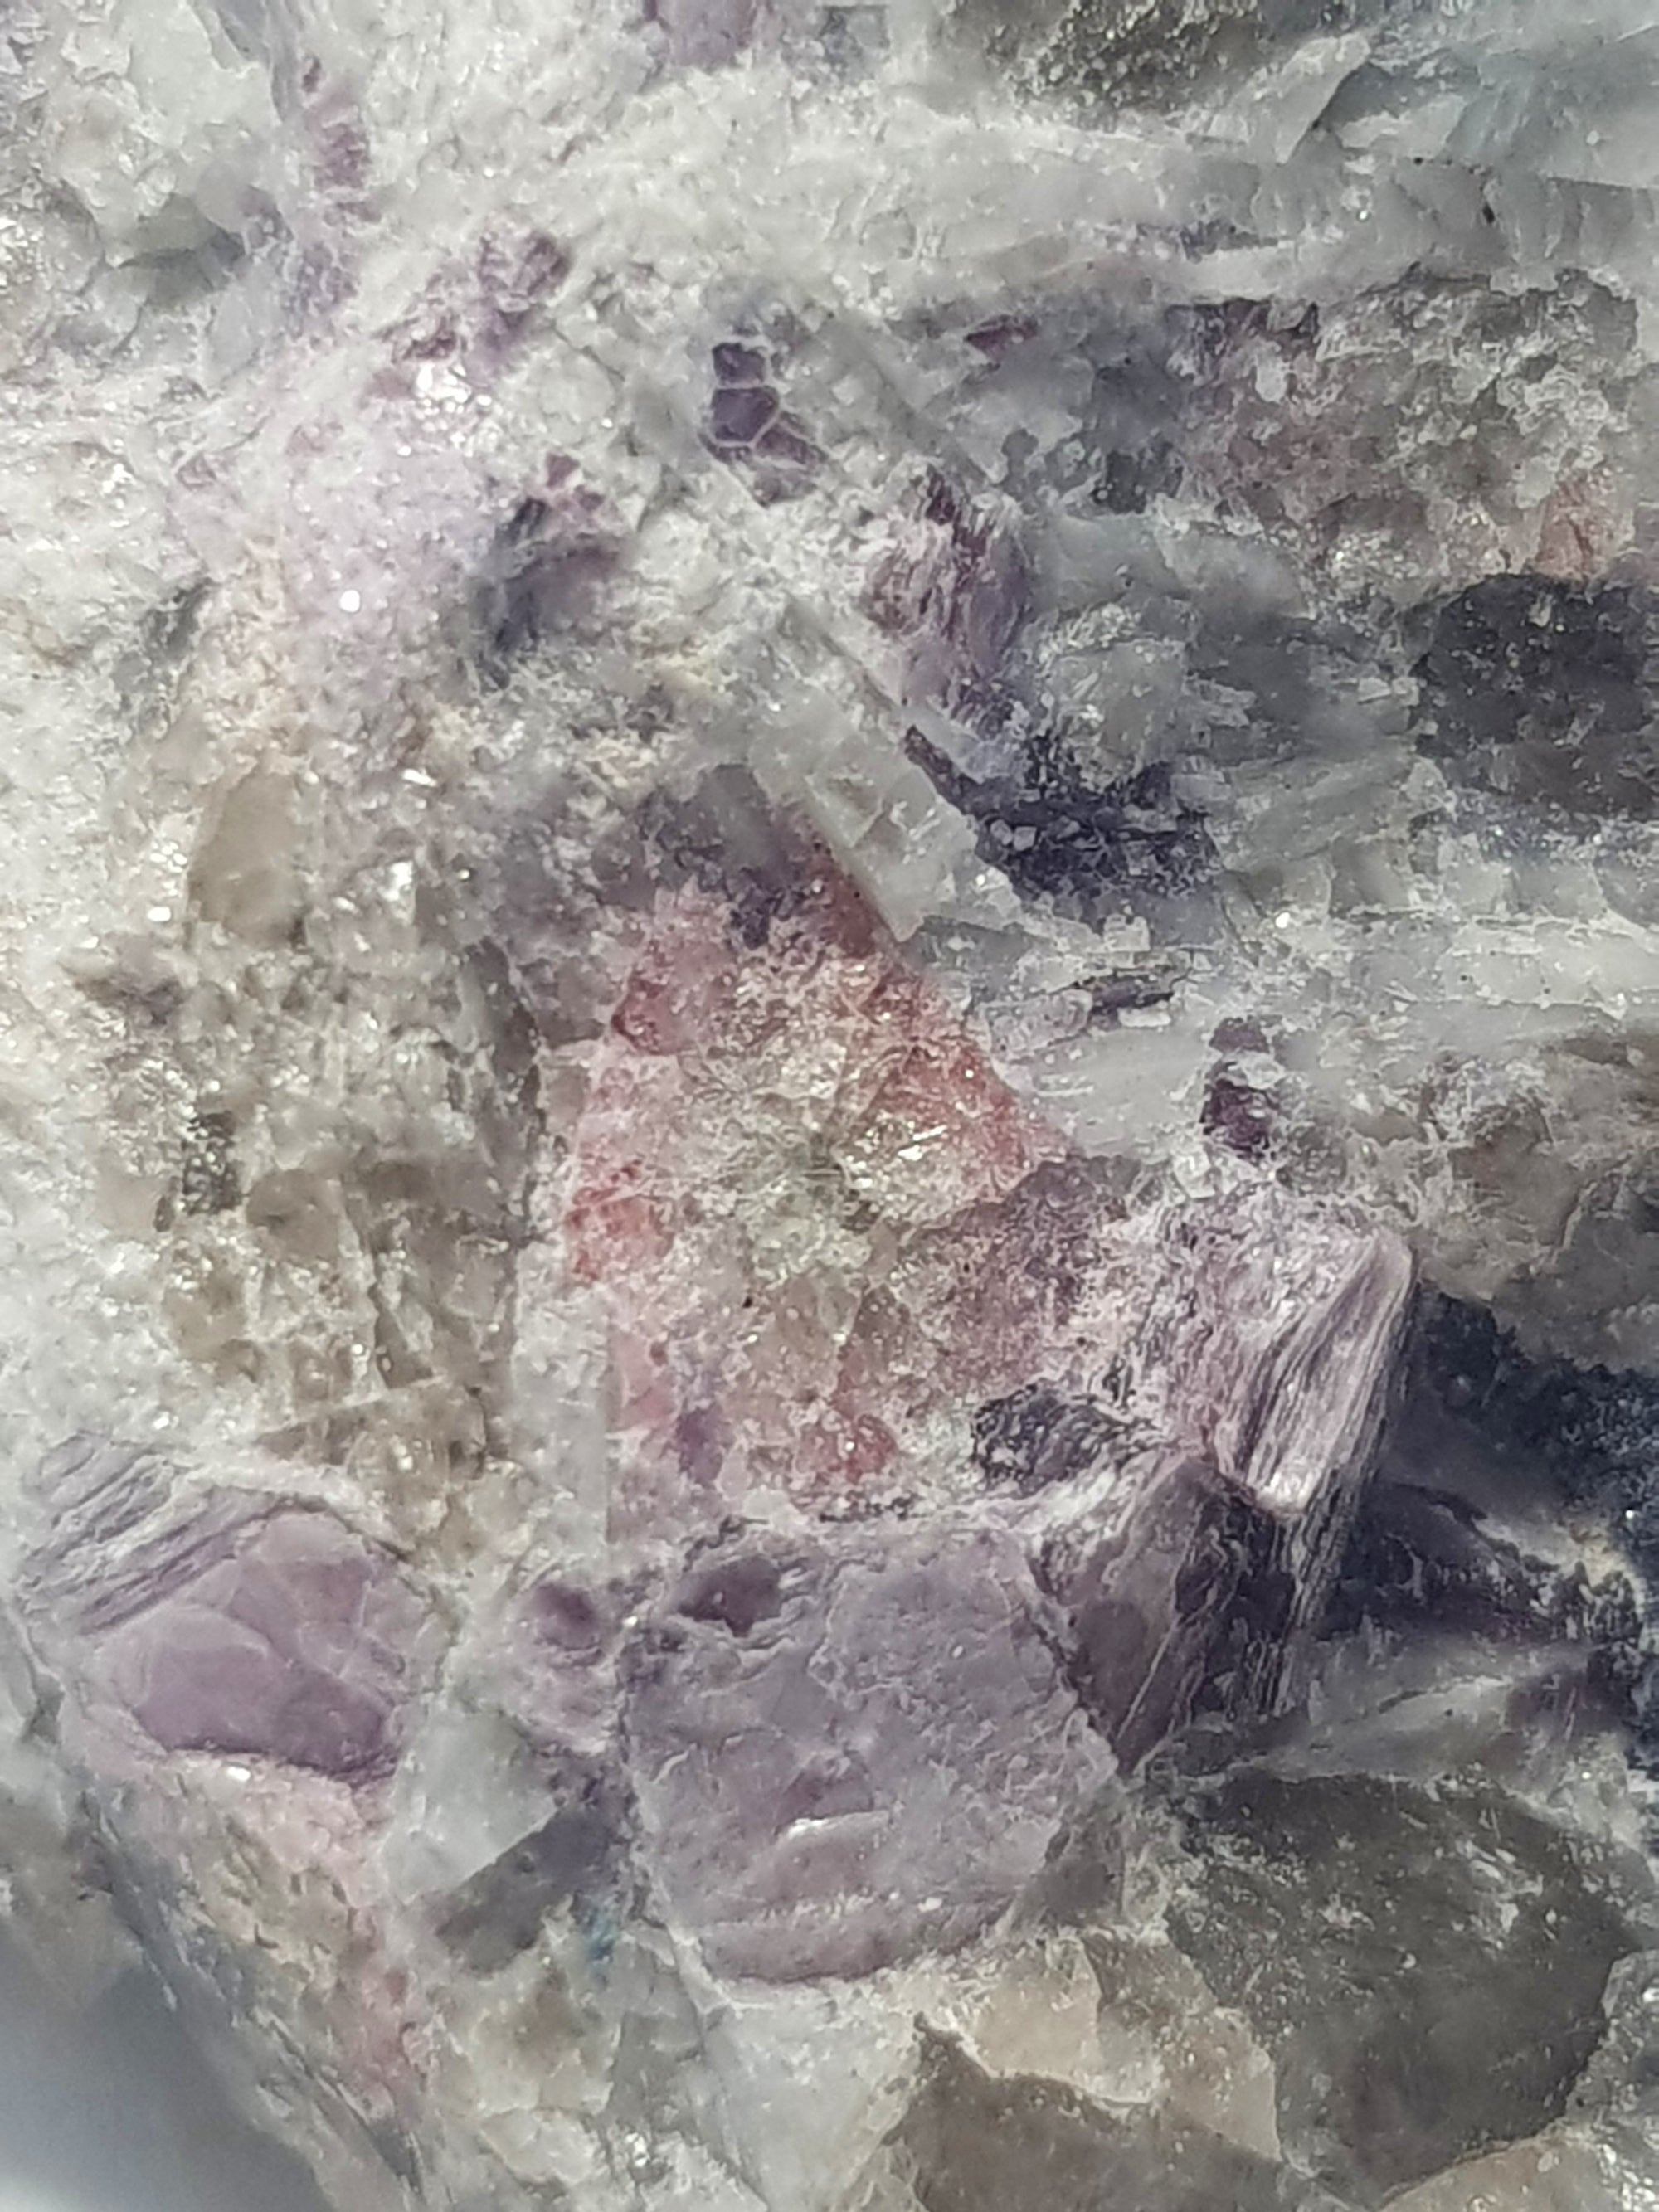 A close up view of pink tourmaline cut in cross section within a white rock.. There are multiple crystals of lepidolite. They have no clear orientation within the rock. The majority of the rock consists of awhite mineral with a blocky cleavage. Smoky quartz crystals are also present in this sample.